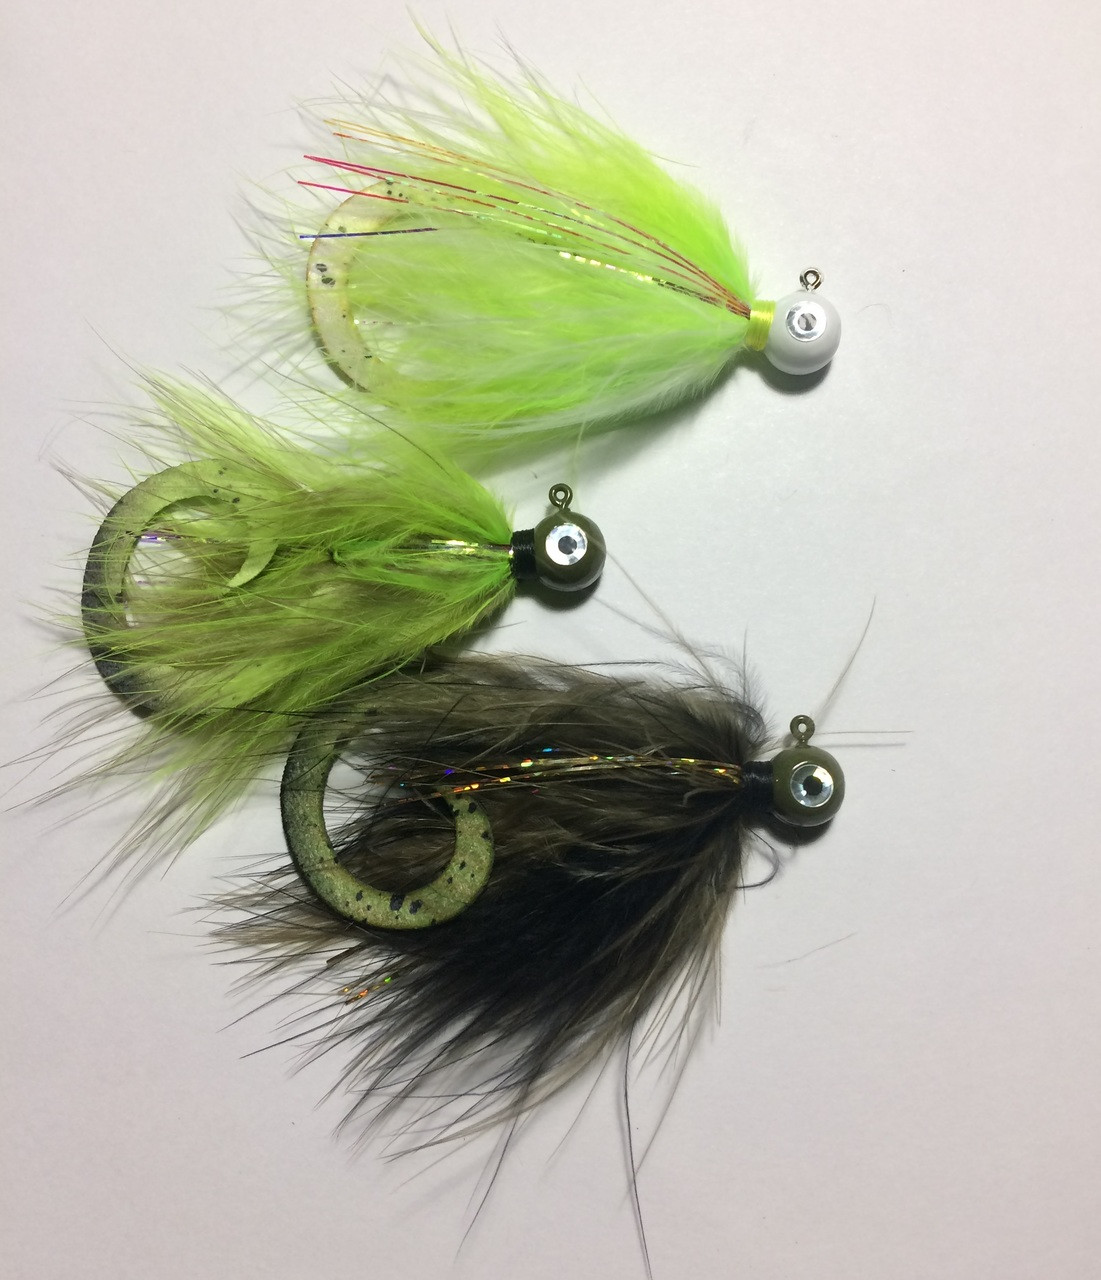 Palmered Marabou Jigs - Curly Tails - Speckled